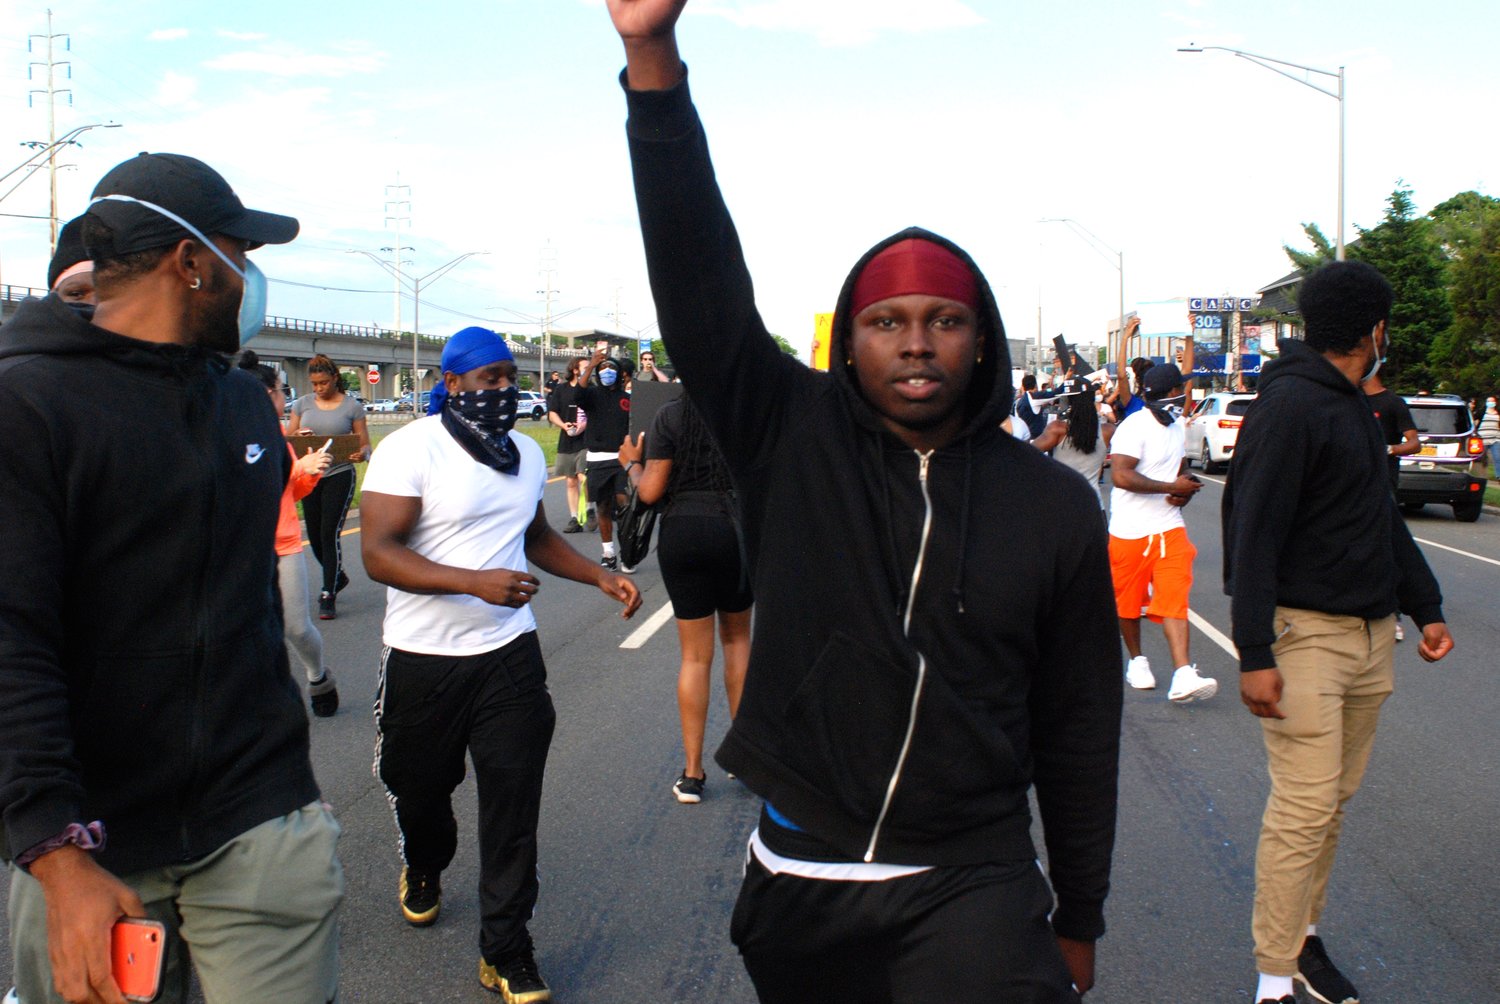 Many demonstrators marched with their arms held high.